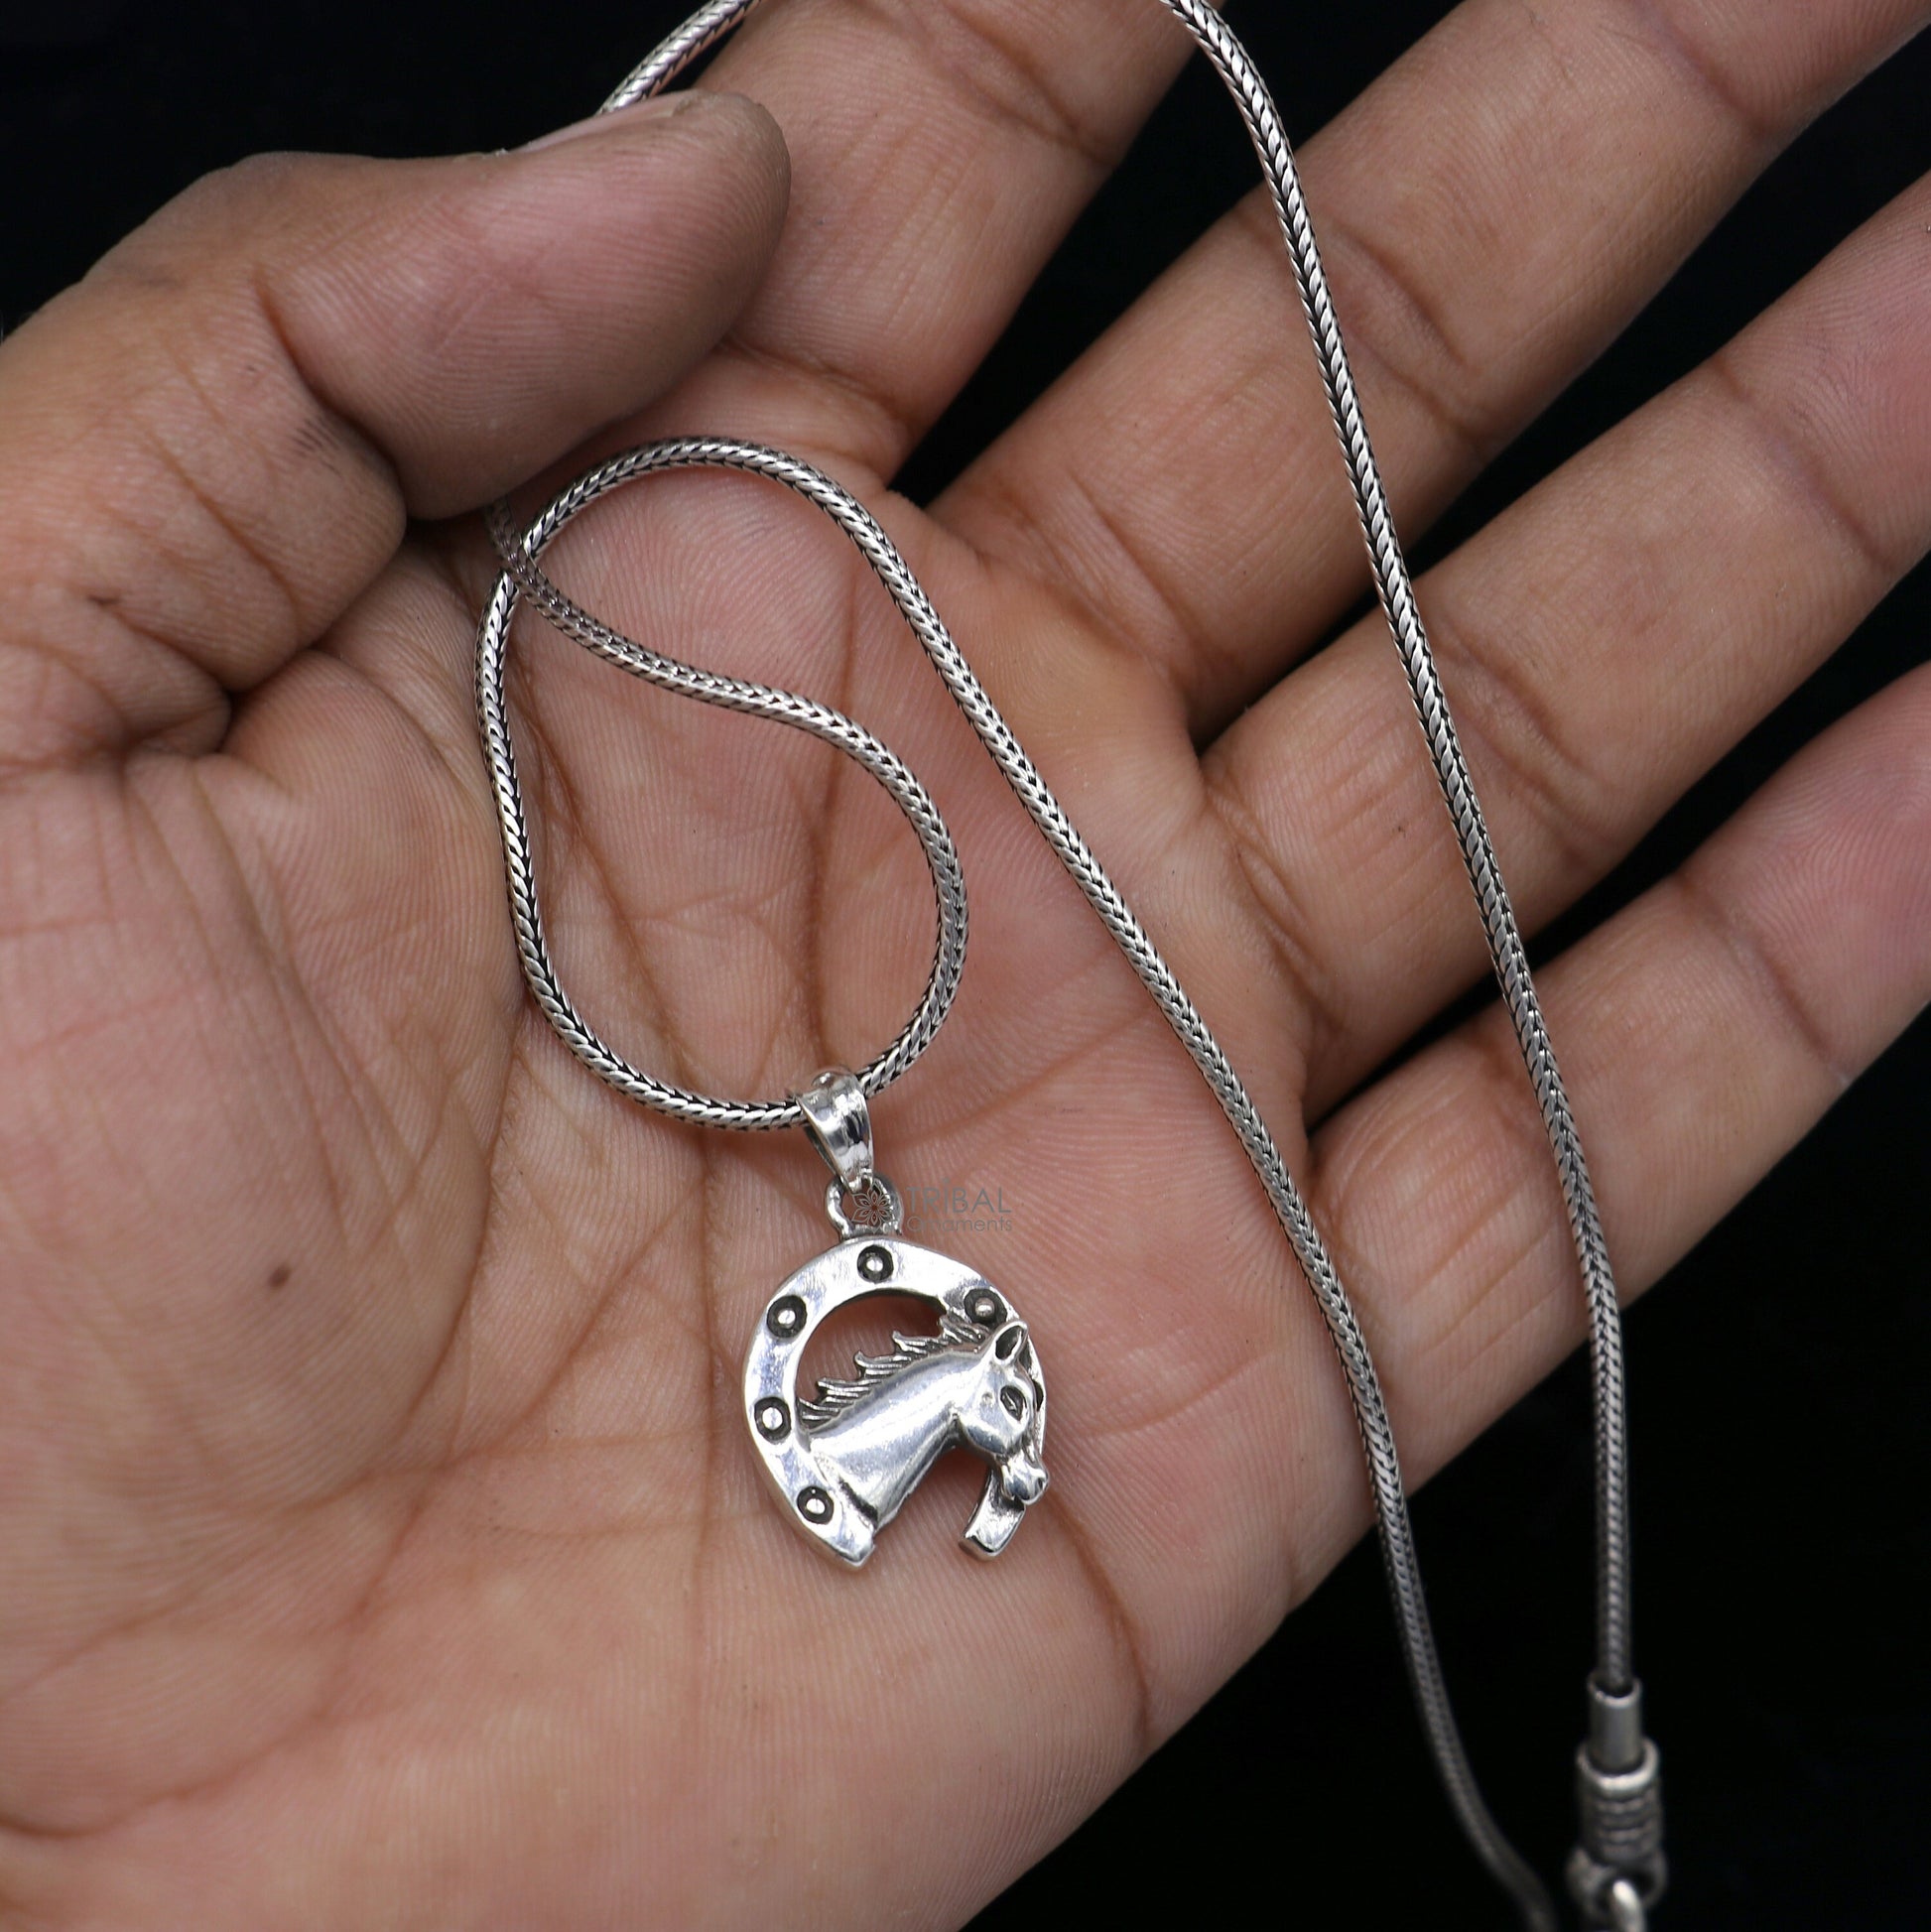 Little Girl's Horse Necklace in Sterling Silver Personalized with Initial Charm 20